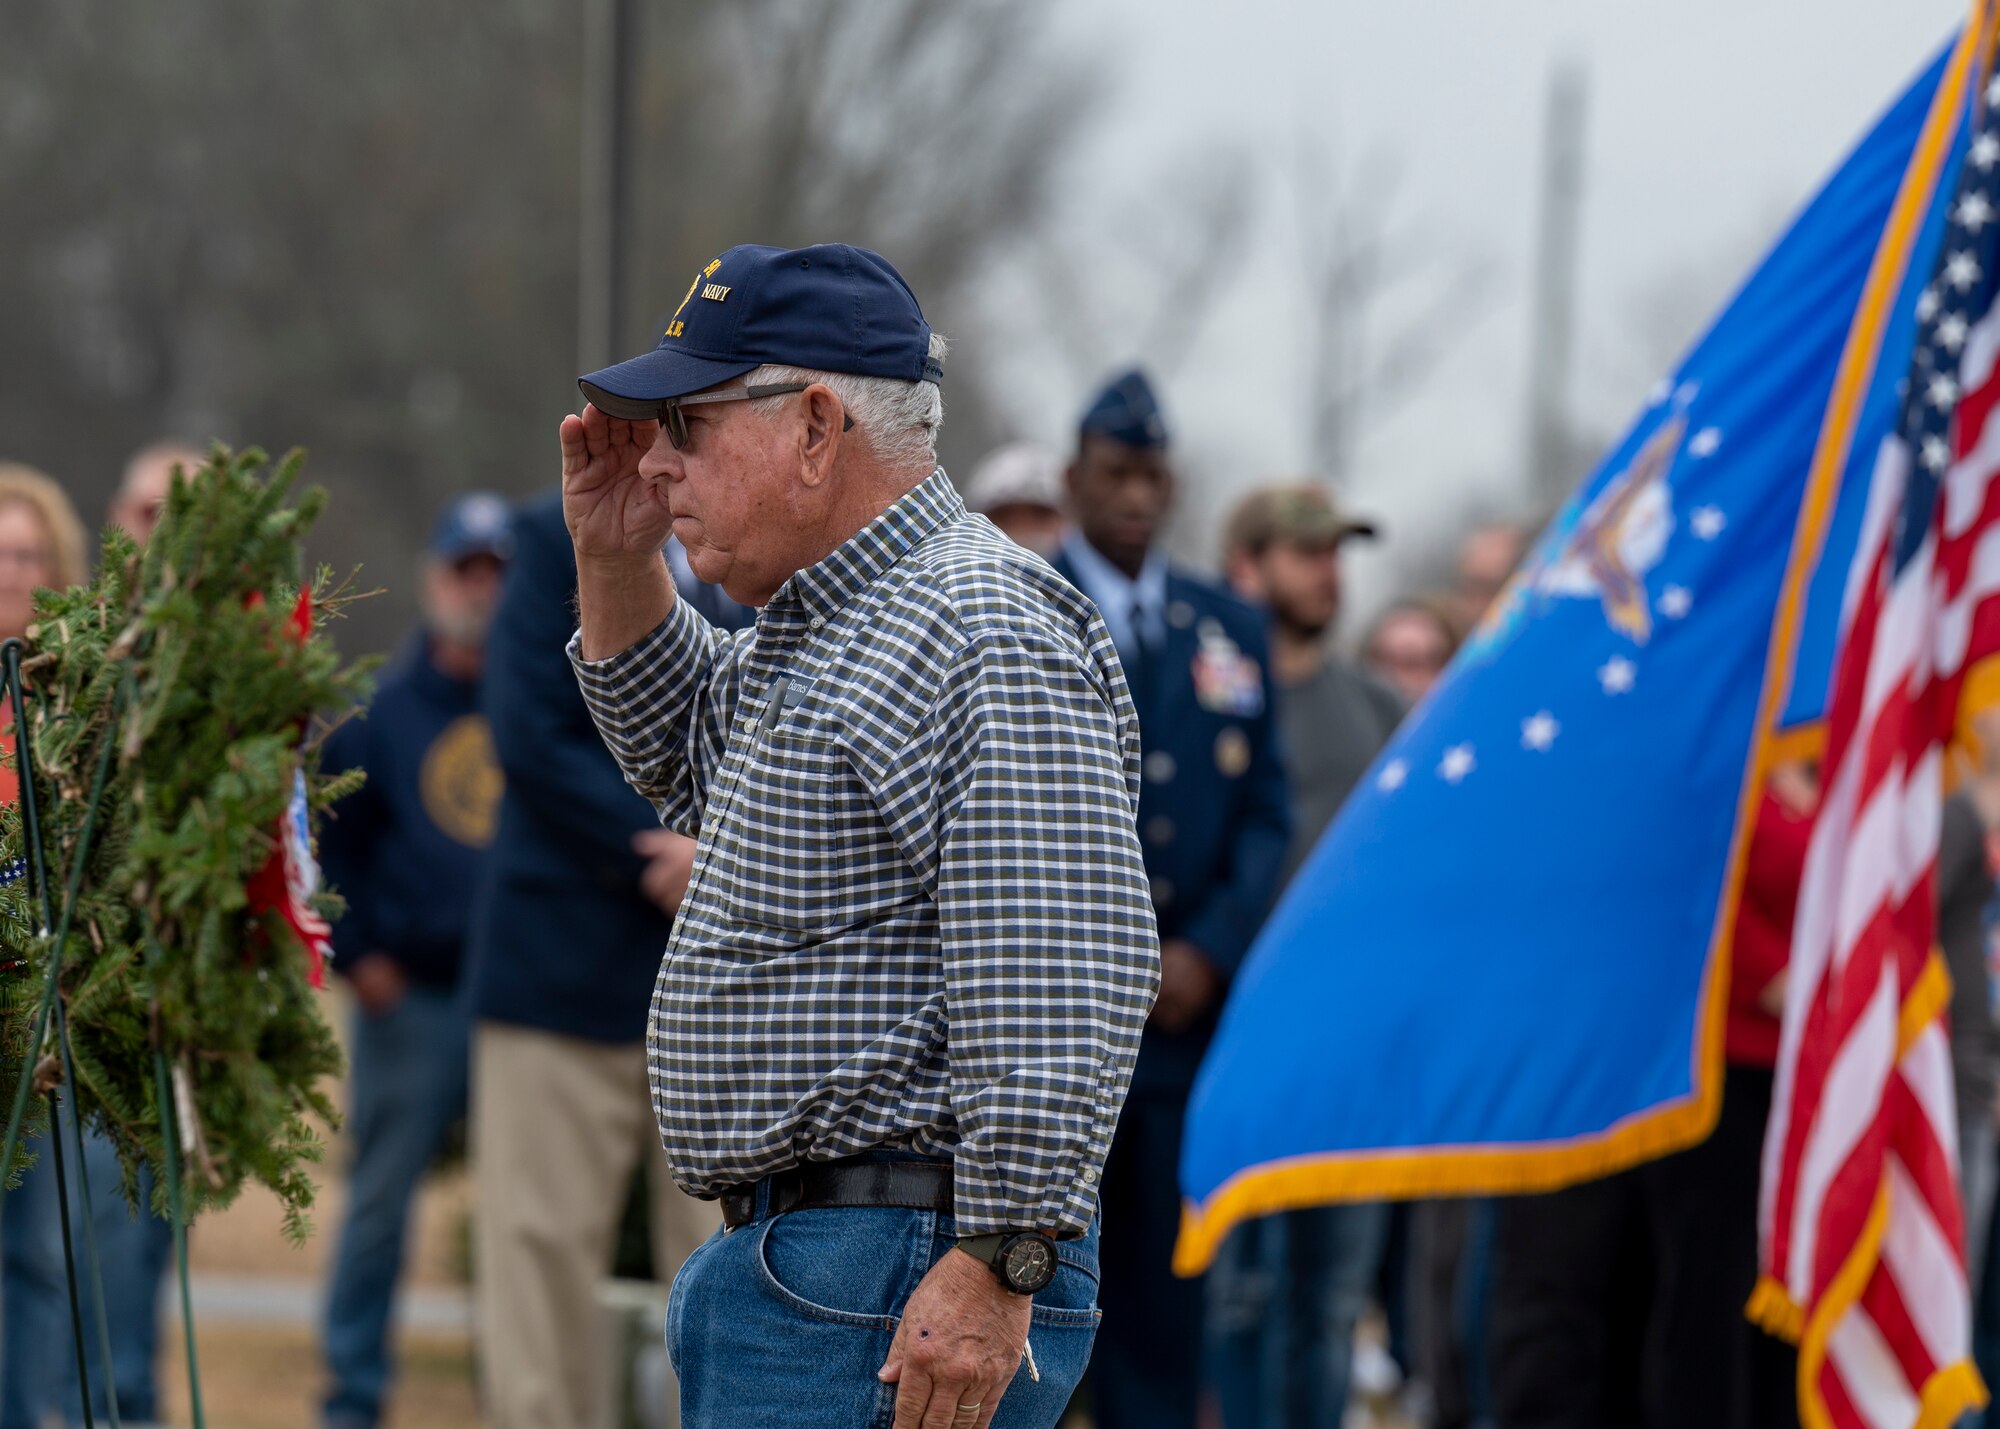 A local veteran salutes while presenting a wreath during a Wreaths Across America ceremony at the Pikeville Cemetery in Pikeville, North Carolina, Dec. 19, 2021.